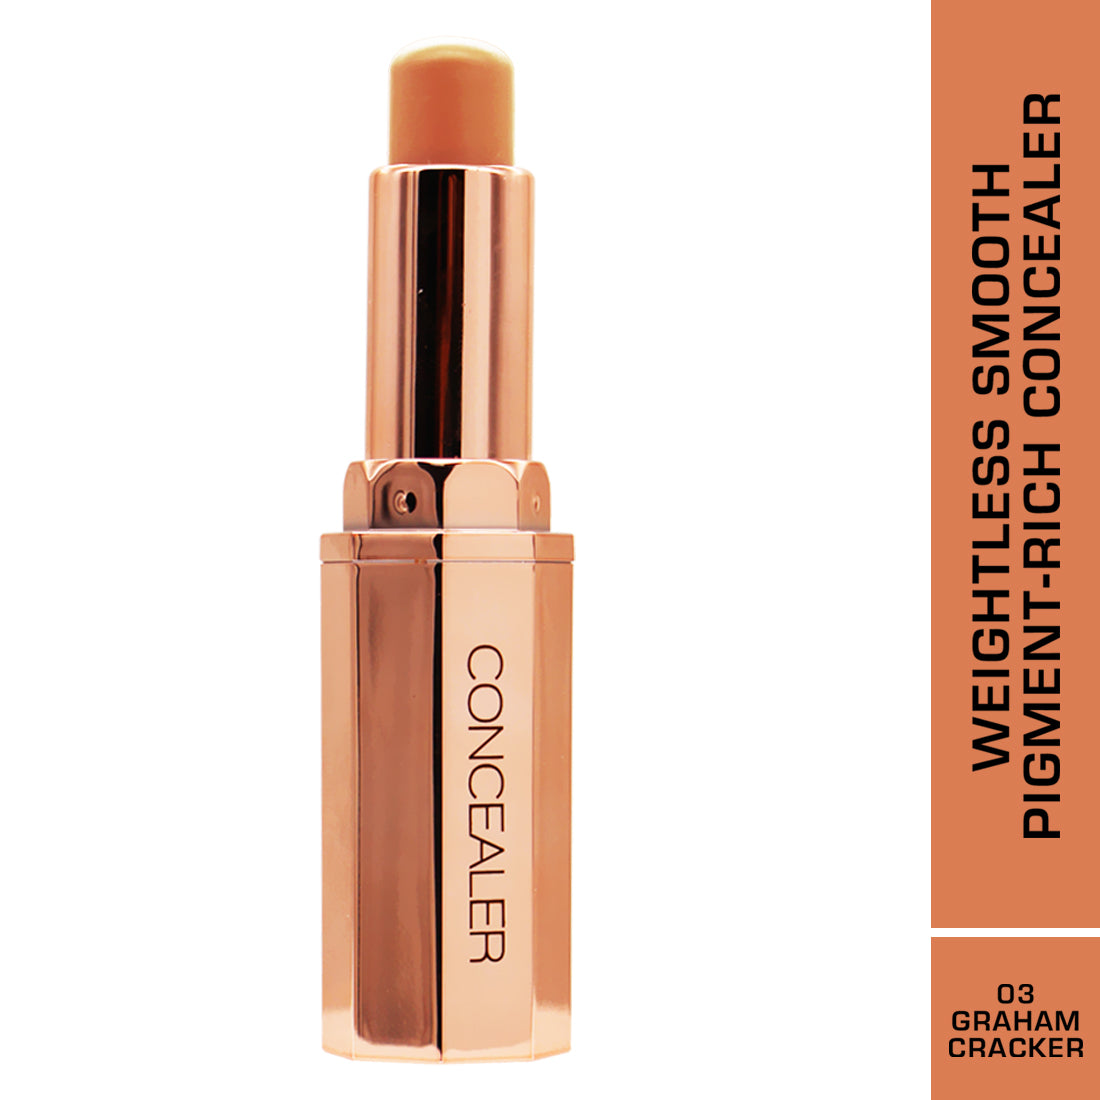 FASHION COLOUR Concealer | Creamy Concealer Stick | Weightless | Smooth Texture | Full Coverage Concealer |Buildable| Covers Blemishes & Hides Dark Circles | 3.8g